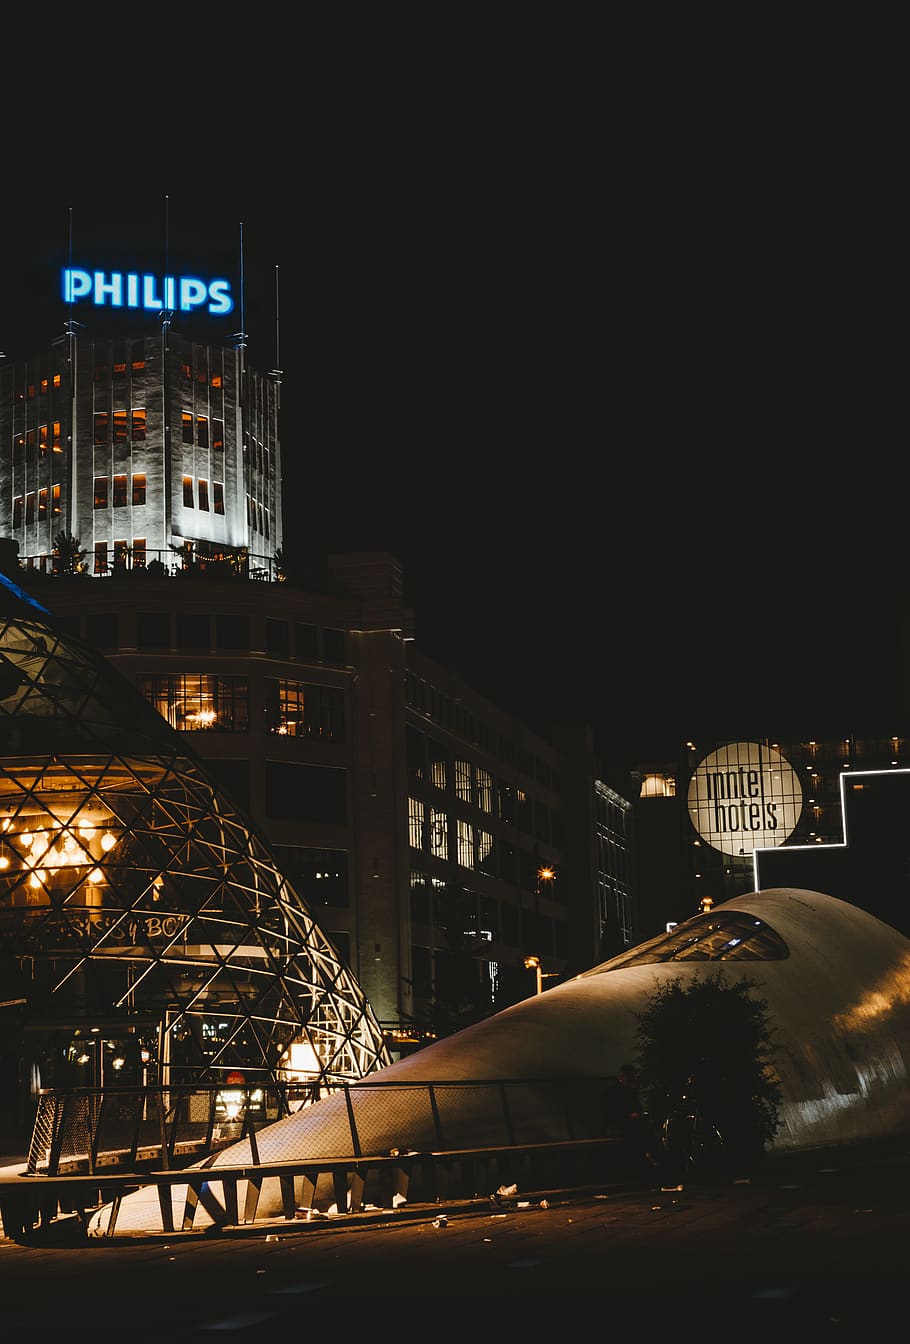 eindhoven, netherlands, piazza, philips, lights, hotel, city, HD wallpaper